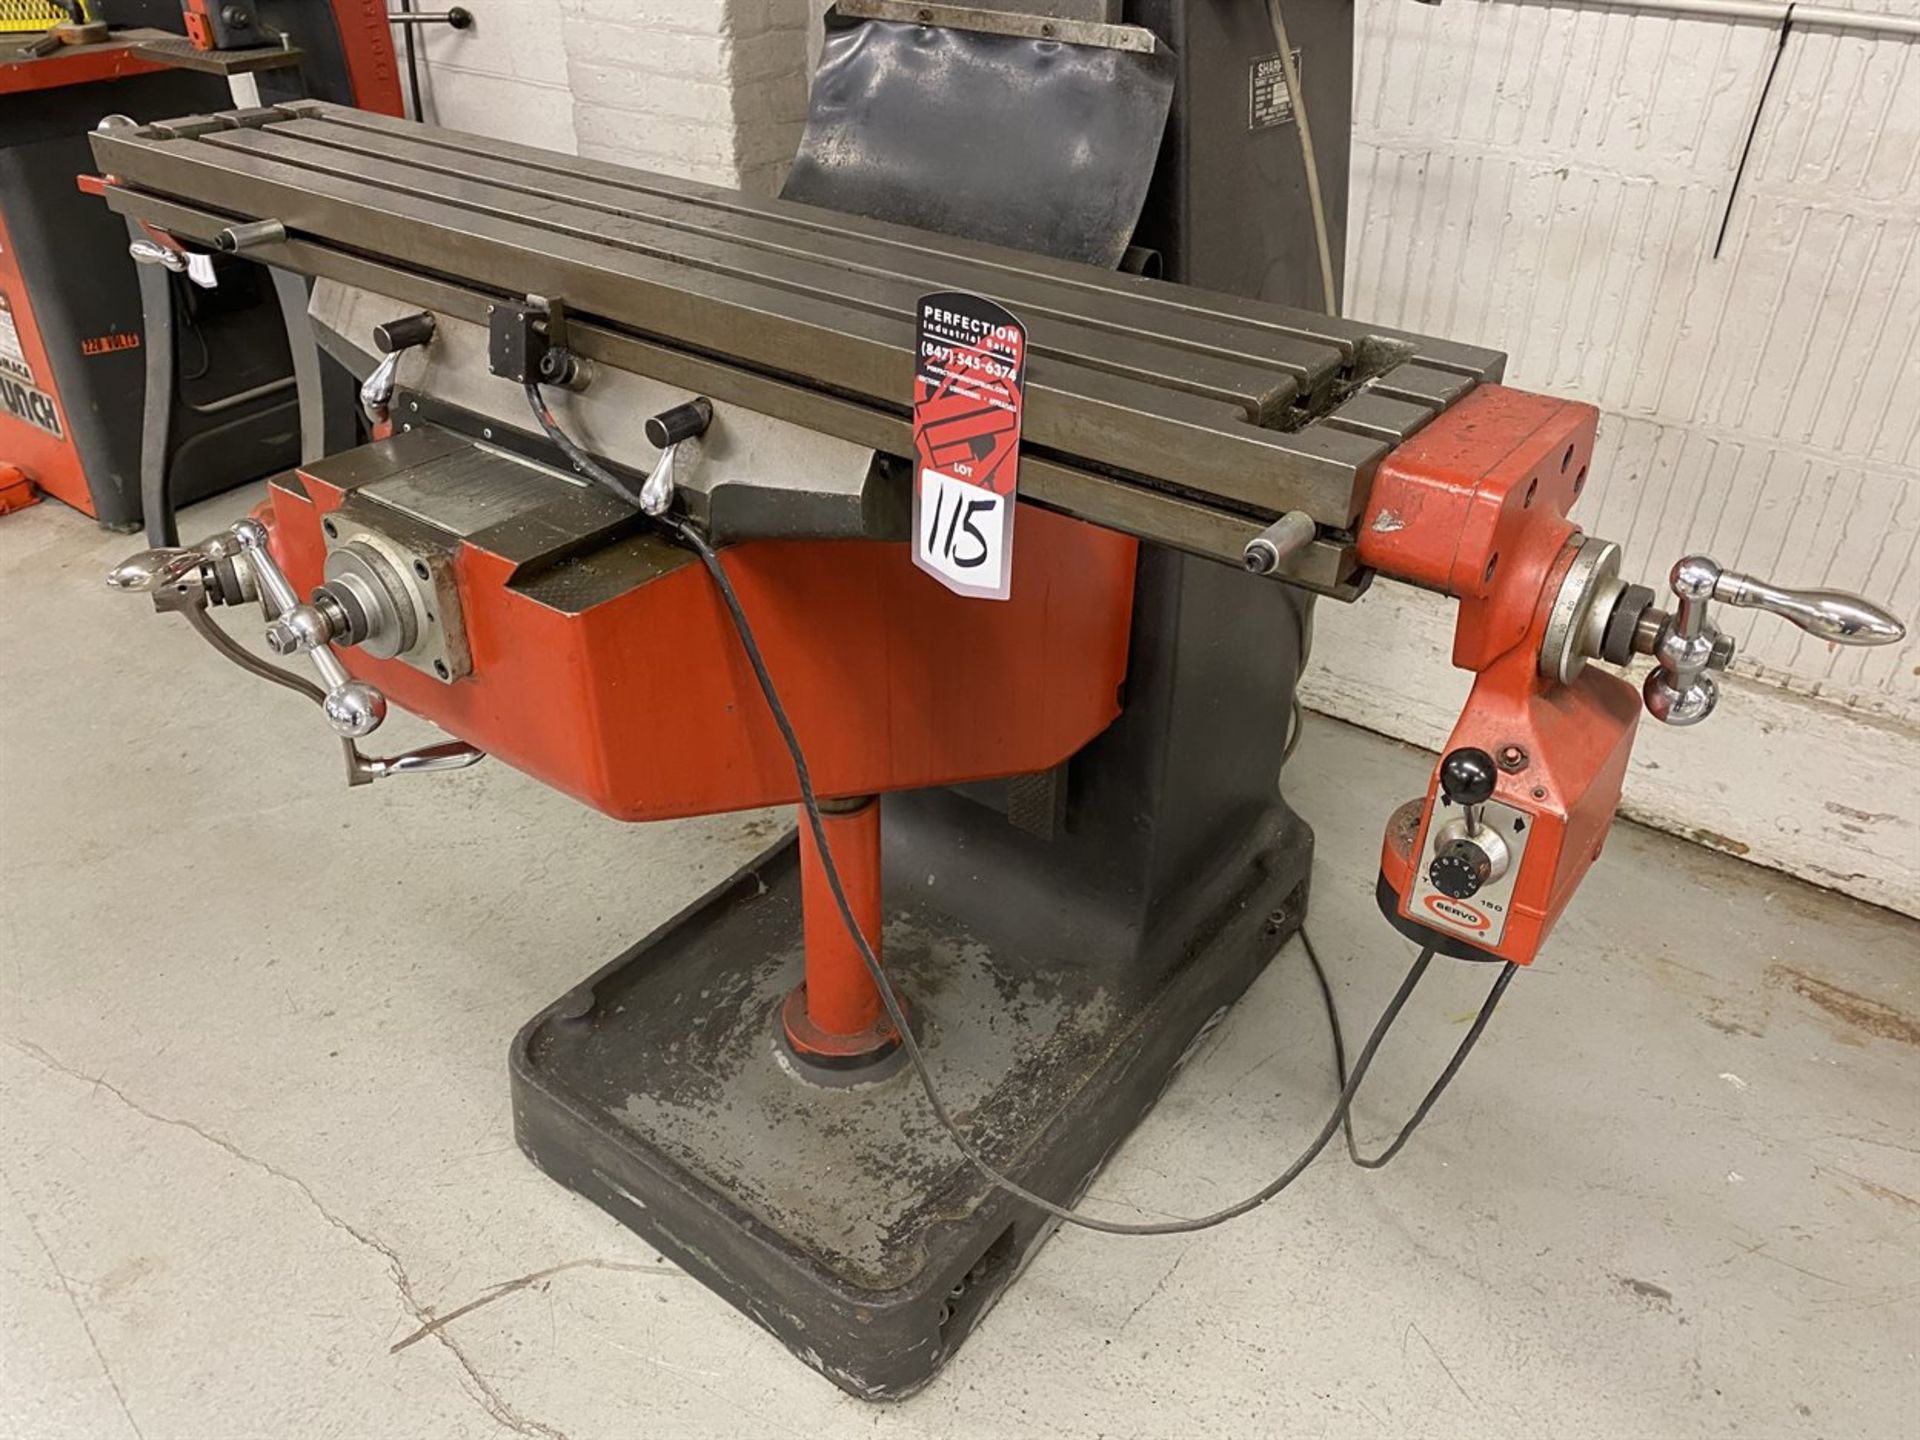 SHARP HCS Milling Machine, s/n 74080233, 9” x 48” Power Feed Table, 60-4500 RPM - Image 2 of 3